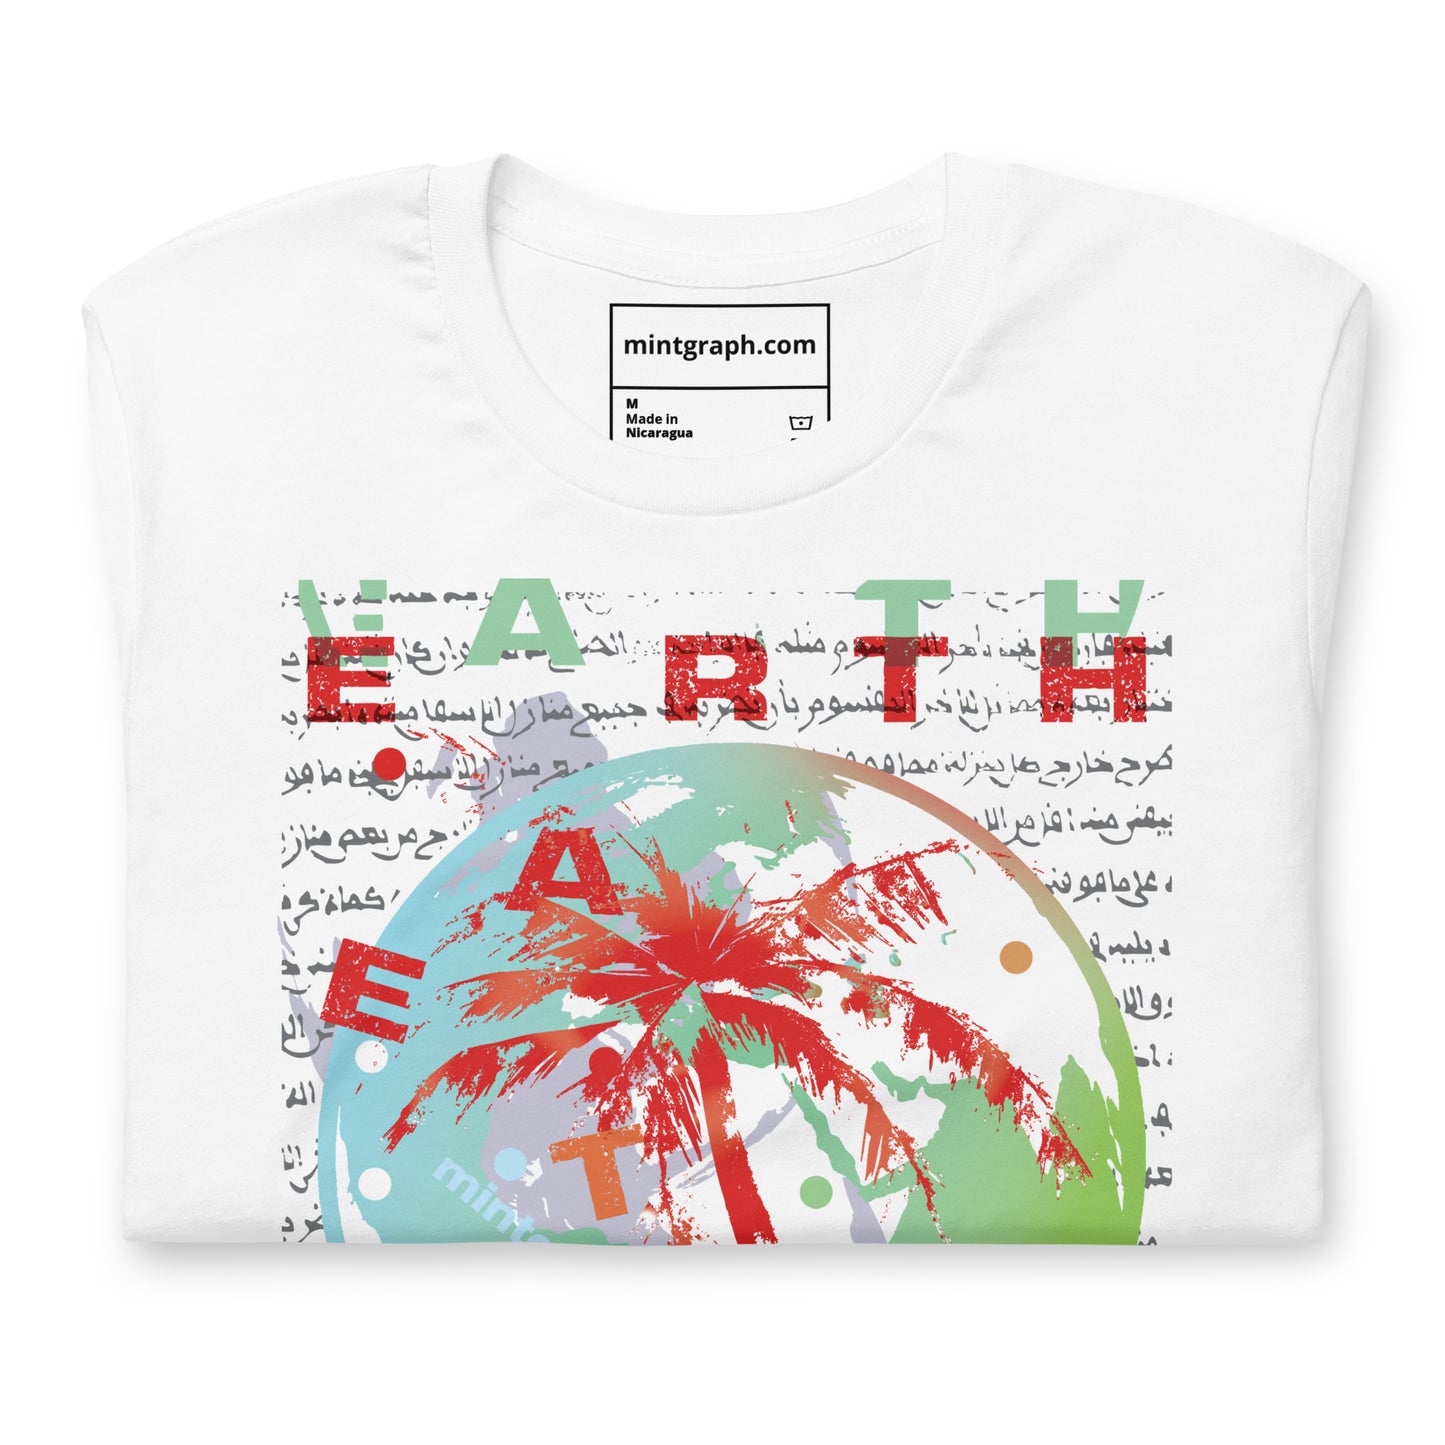 Unisex T-shirt with colorful print - world palm design